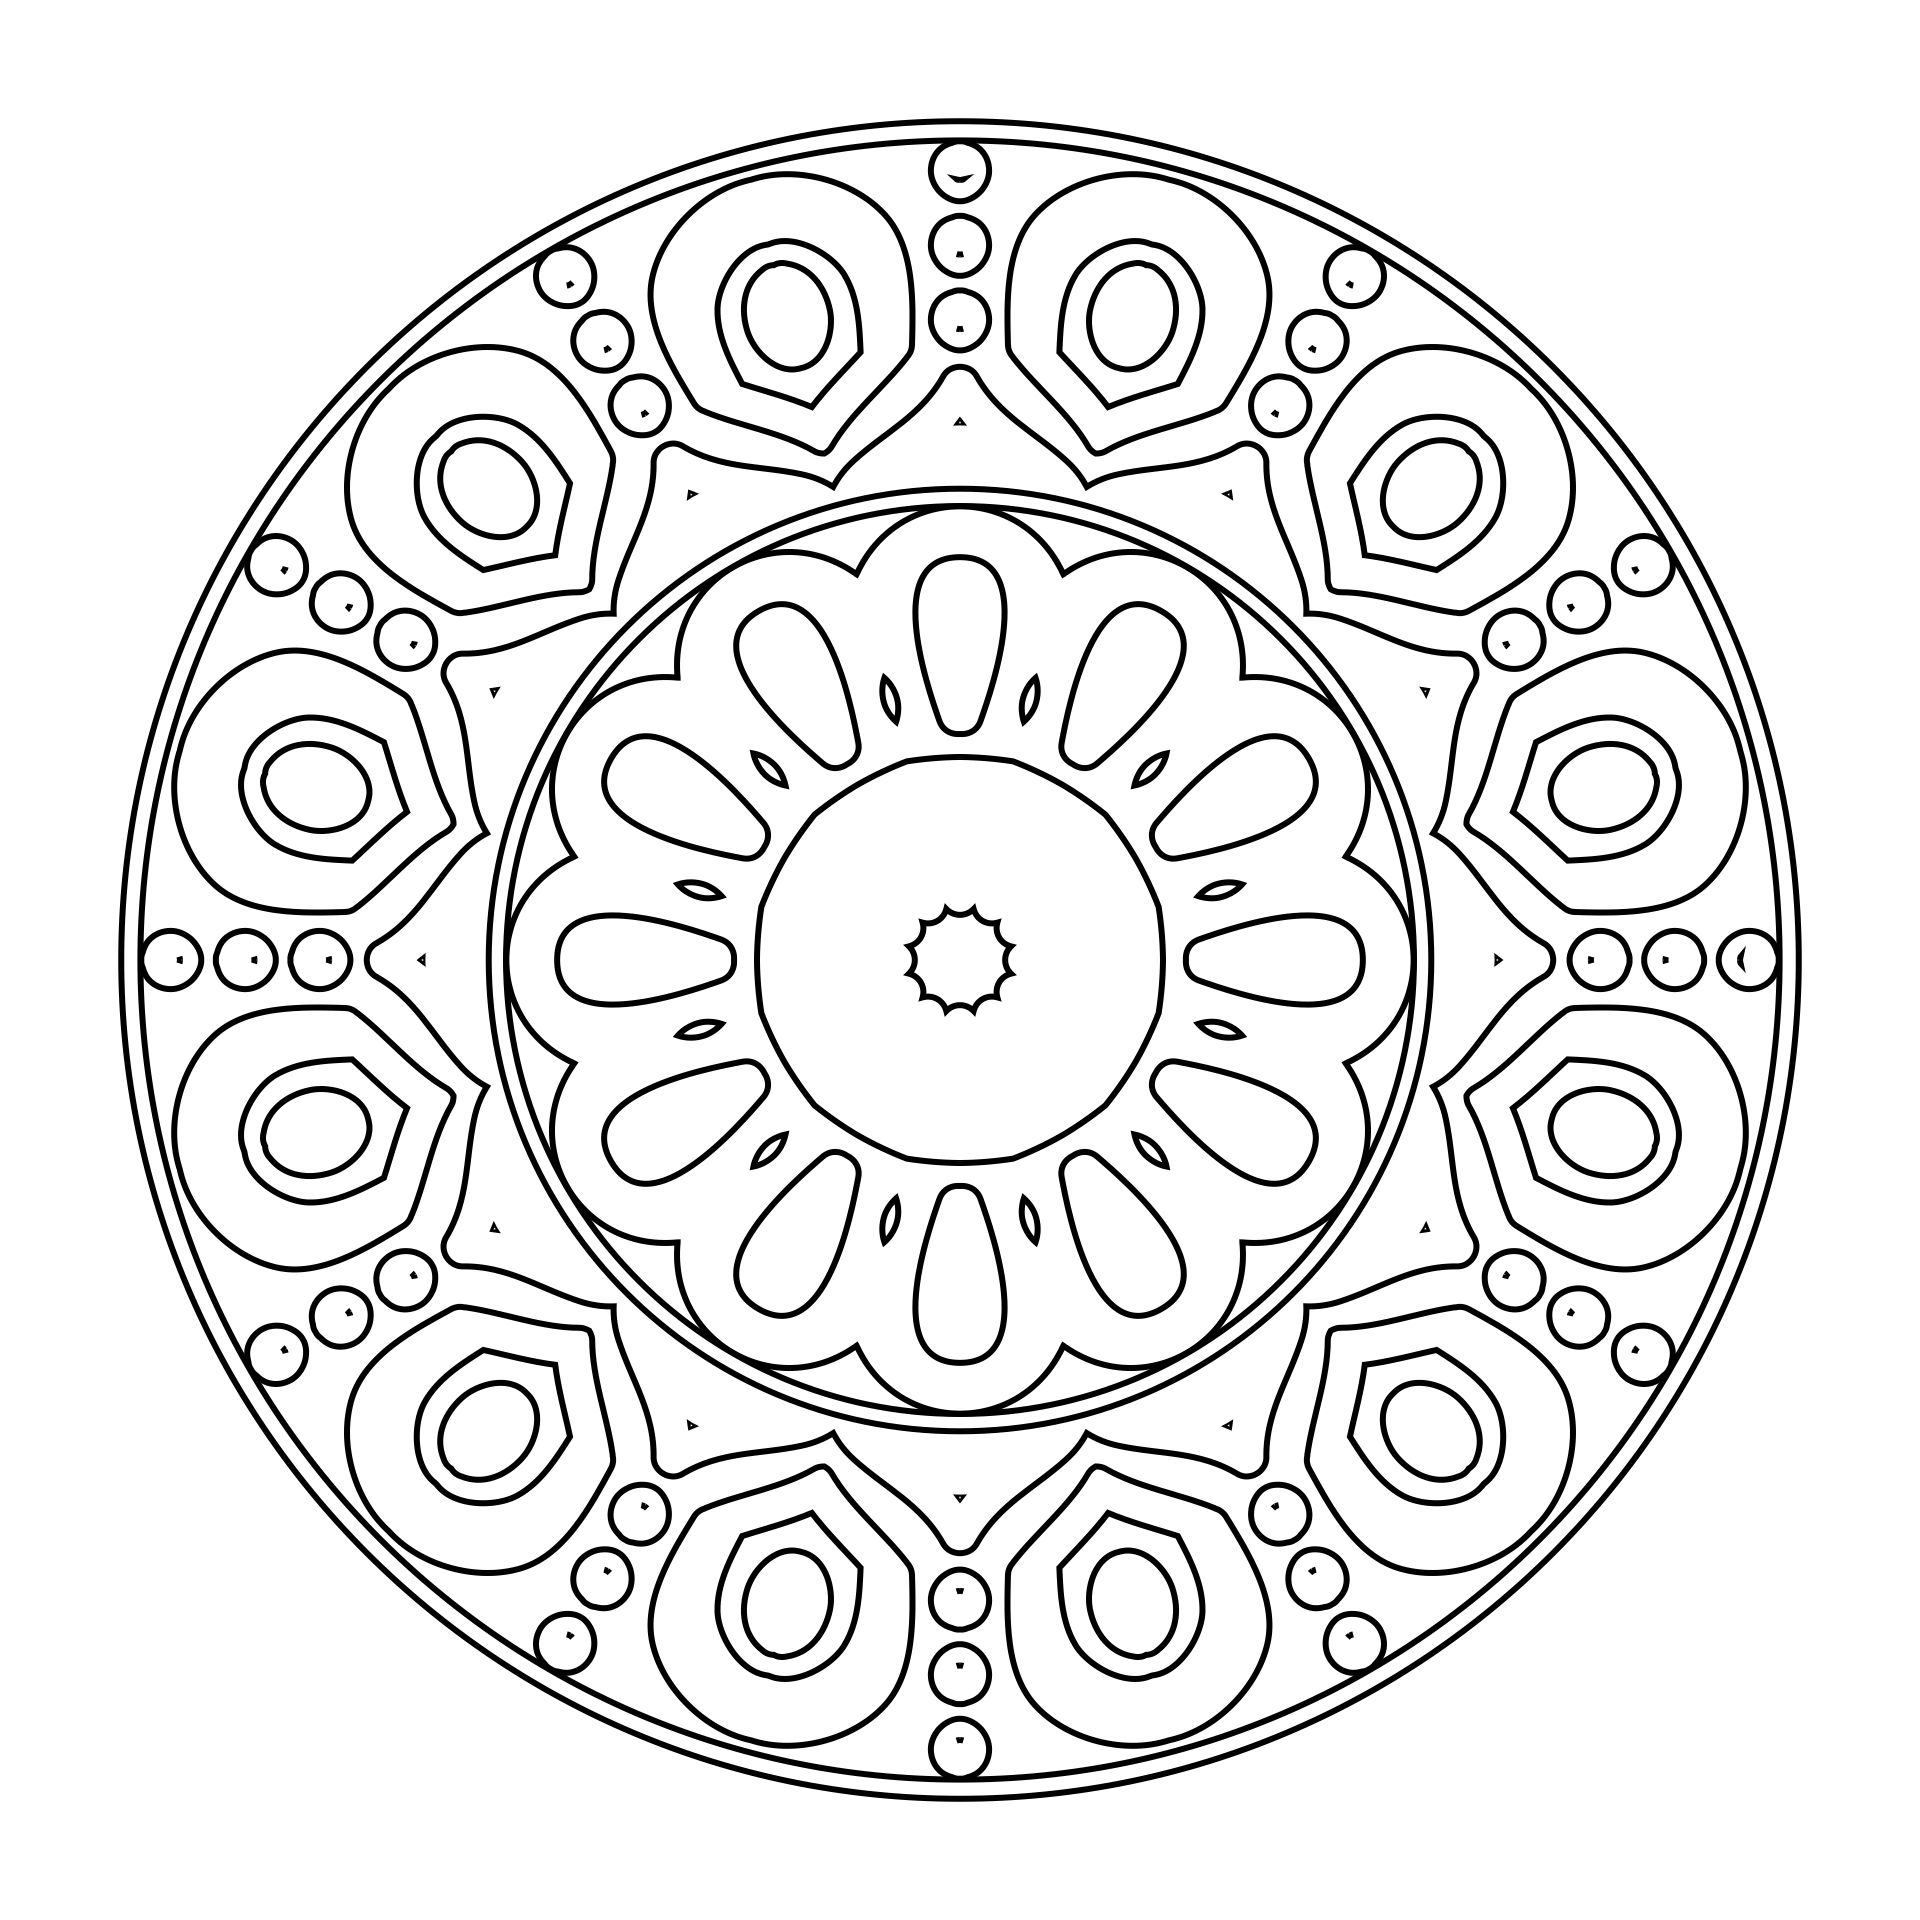 Mandalas Coloring Pages of Cool Designs